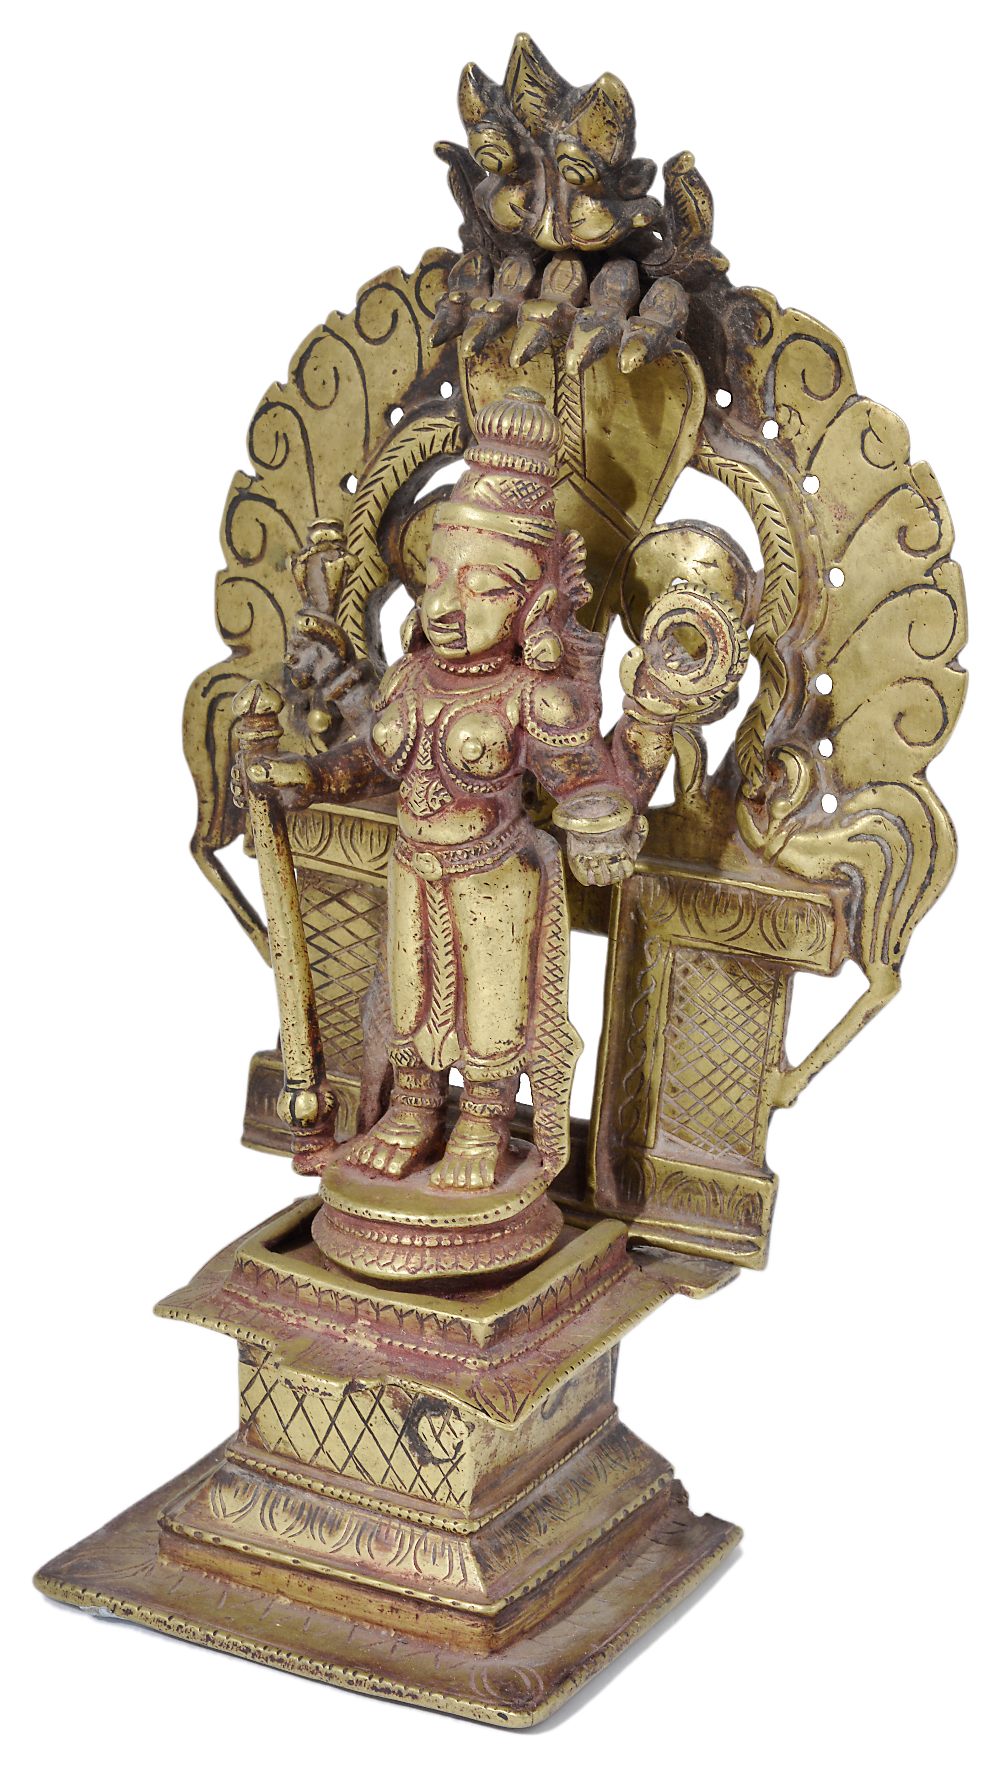 A BRASS FIGURE OF DURGA, WESTERN DECCAN, INDIA, 18TH CENTURY in three sections, standing on a raised